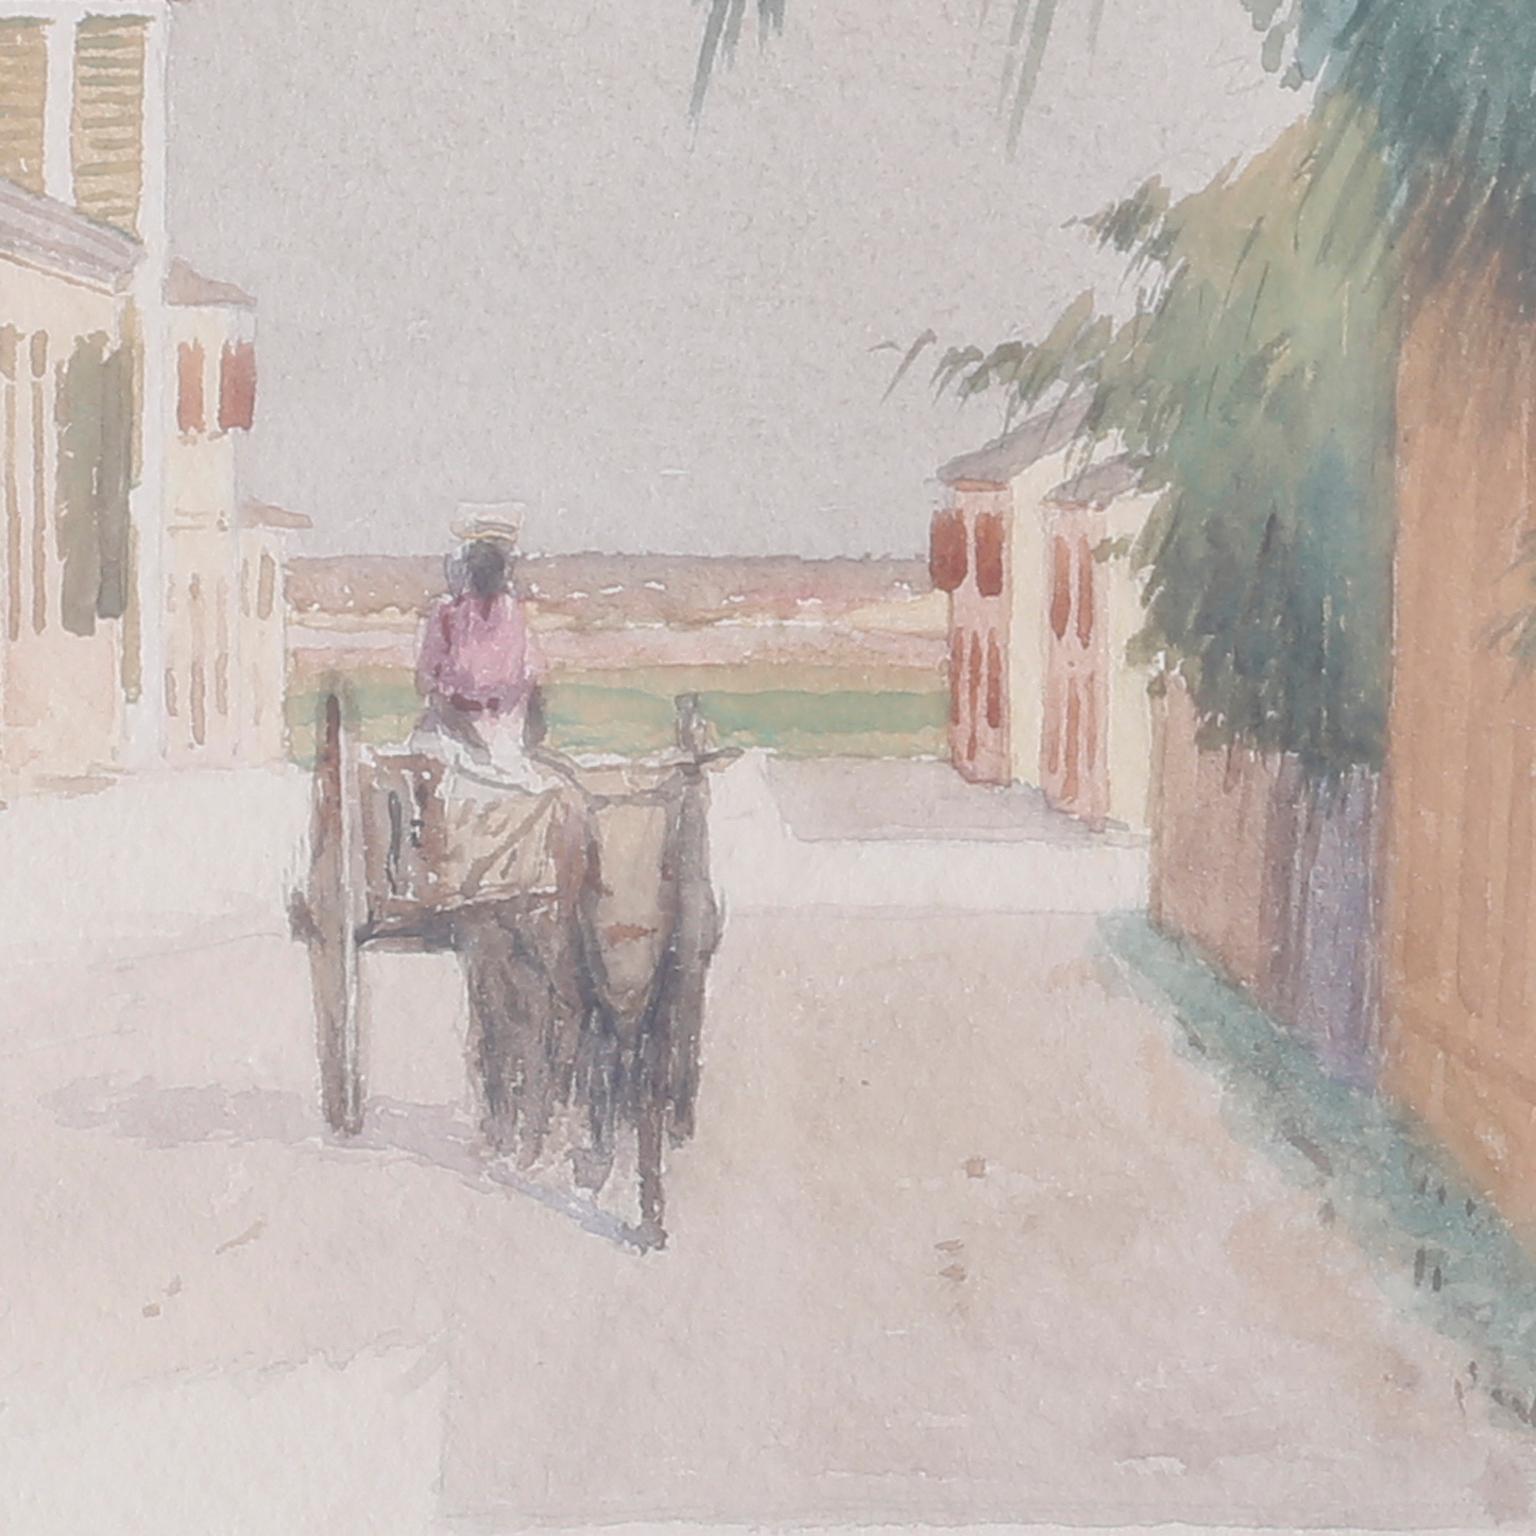 North American Bahamian Street Scene Watercolor Painting by Hartwell Leon Woodcock